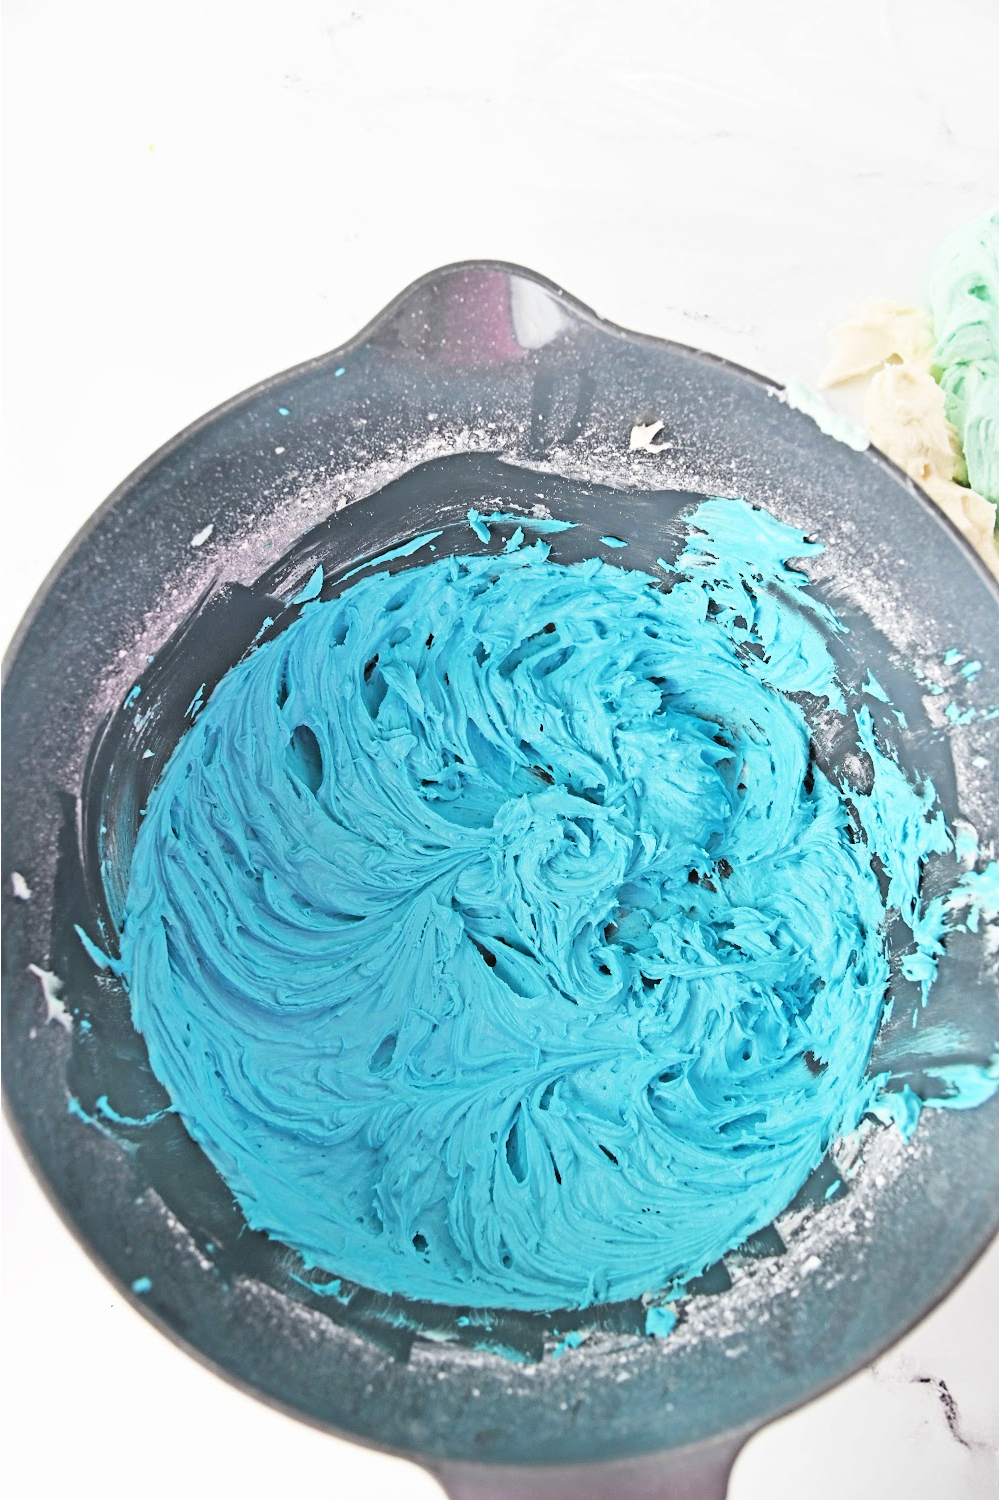 To the remaining buttercream frosting, add 3-4 drops of blue food coloring, and mix to combine.